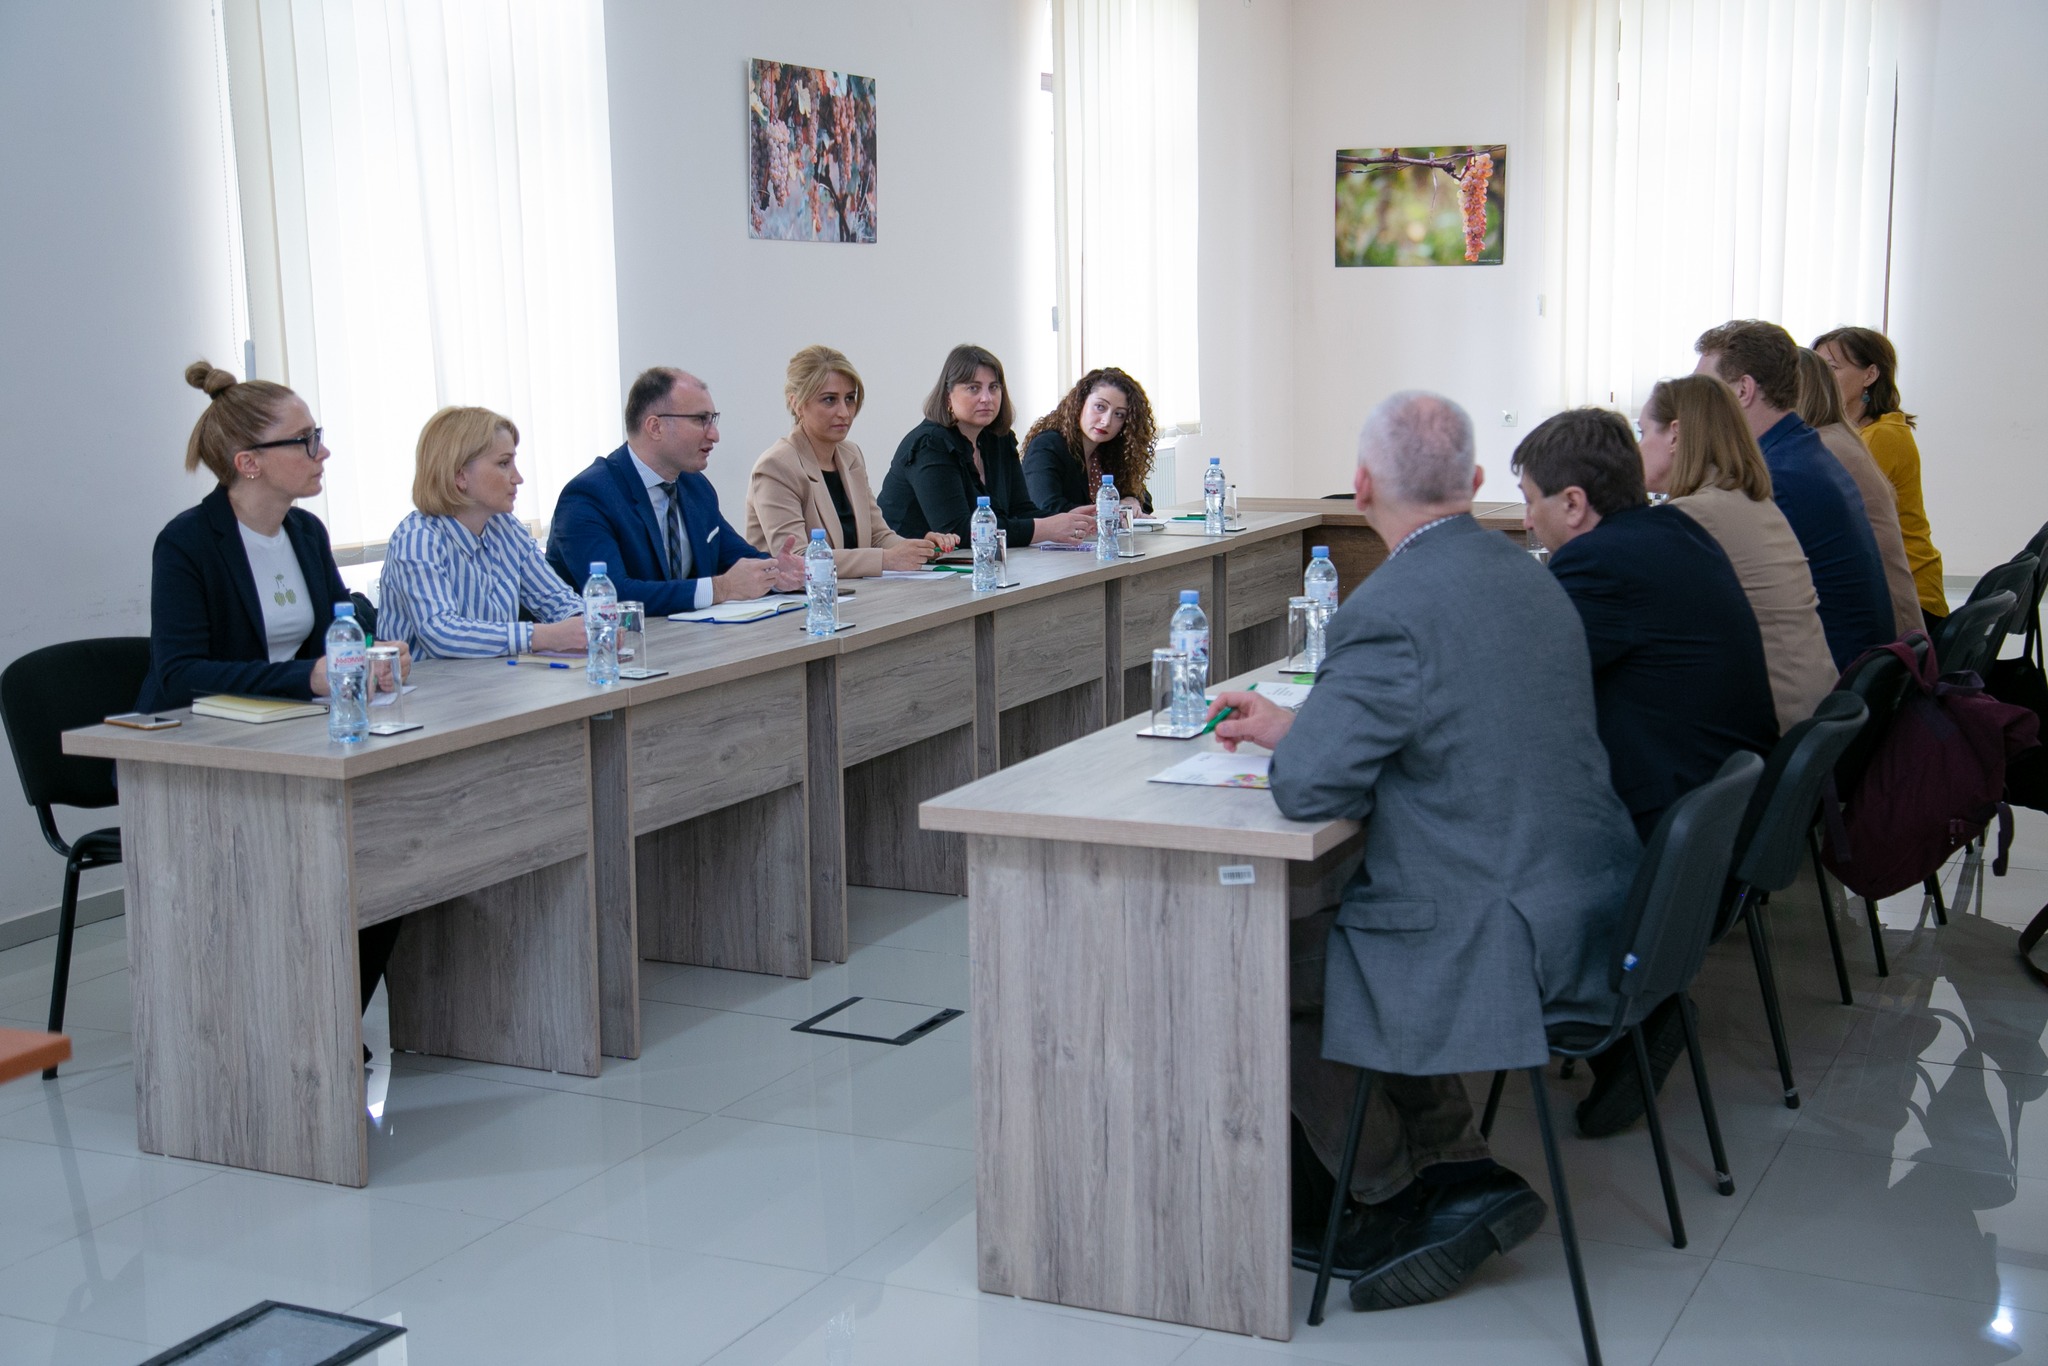 The meeting with the representatives of the Latvian Rural Advisory and Training Center